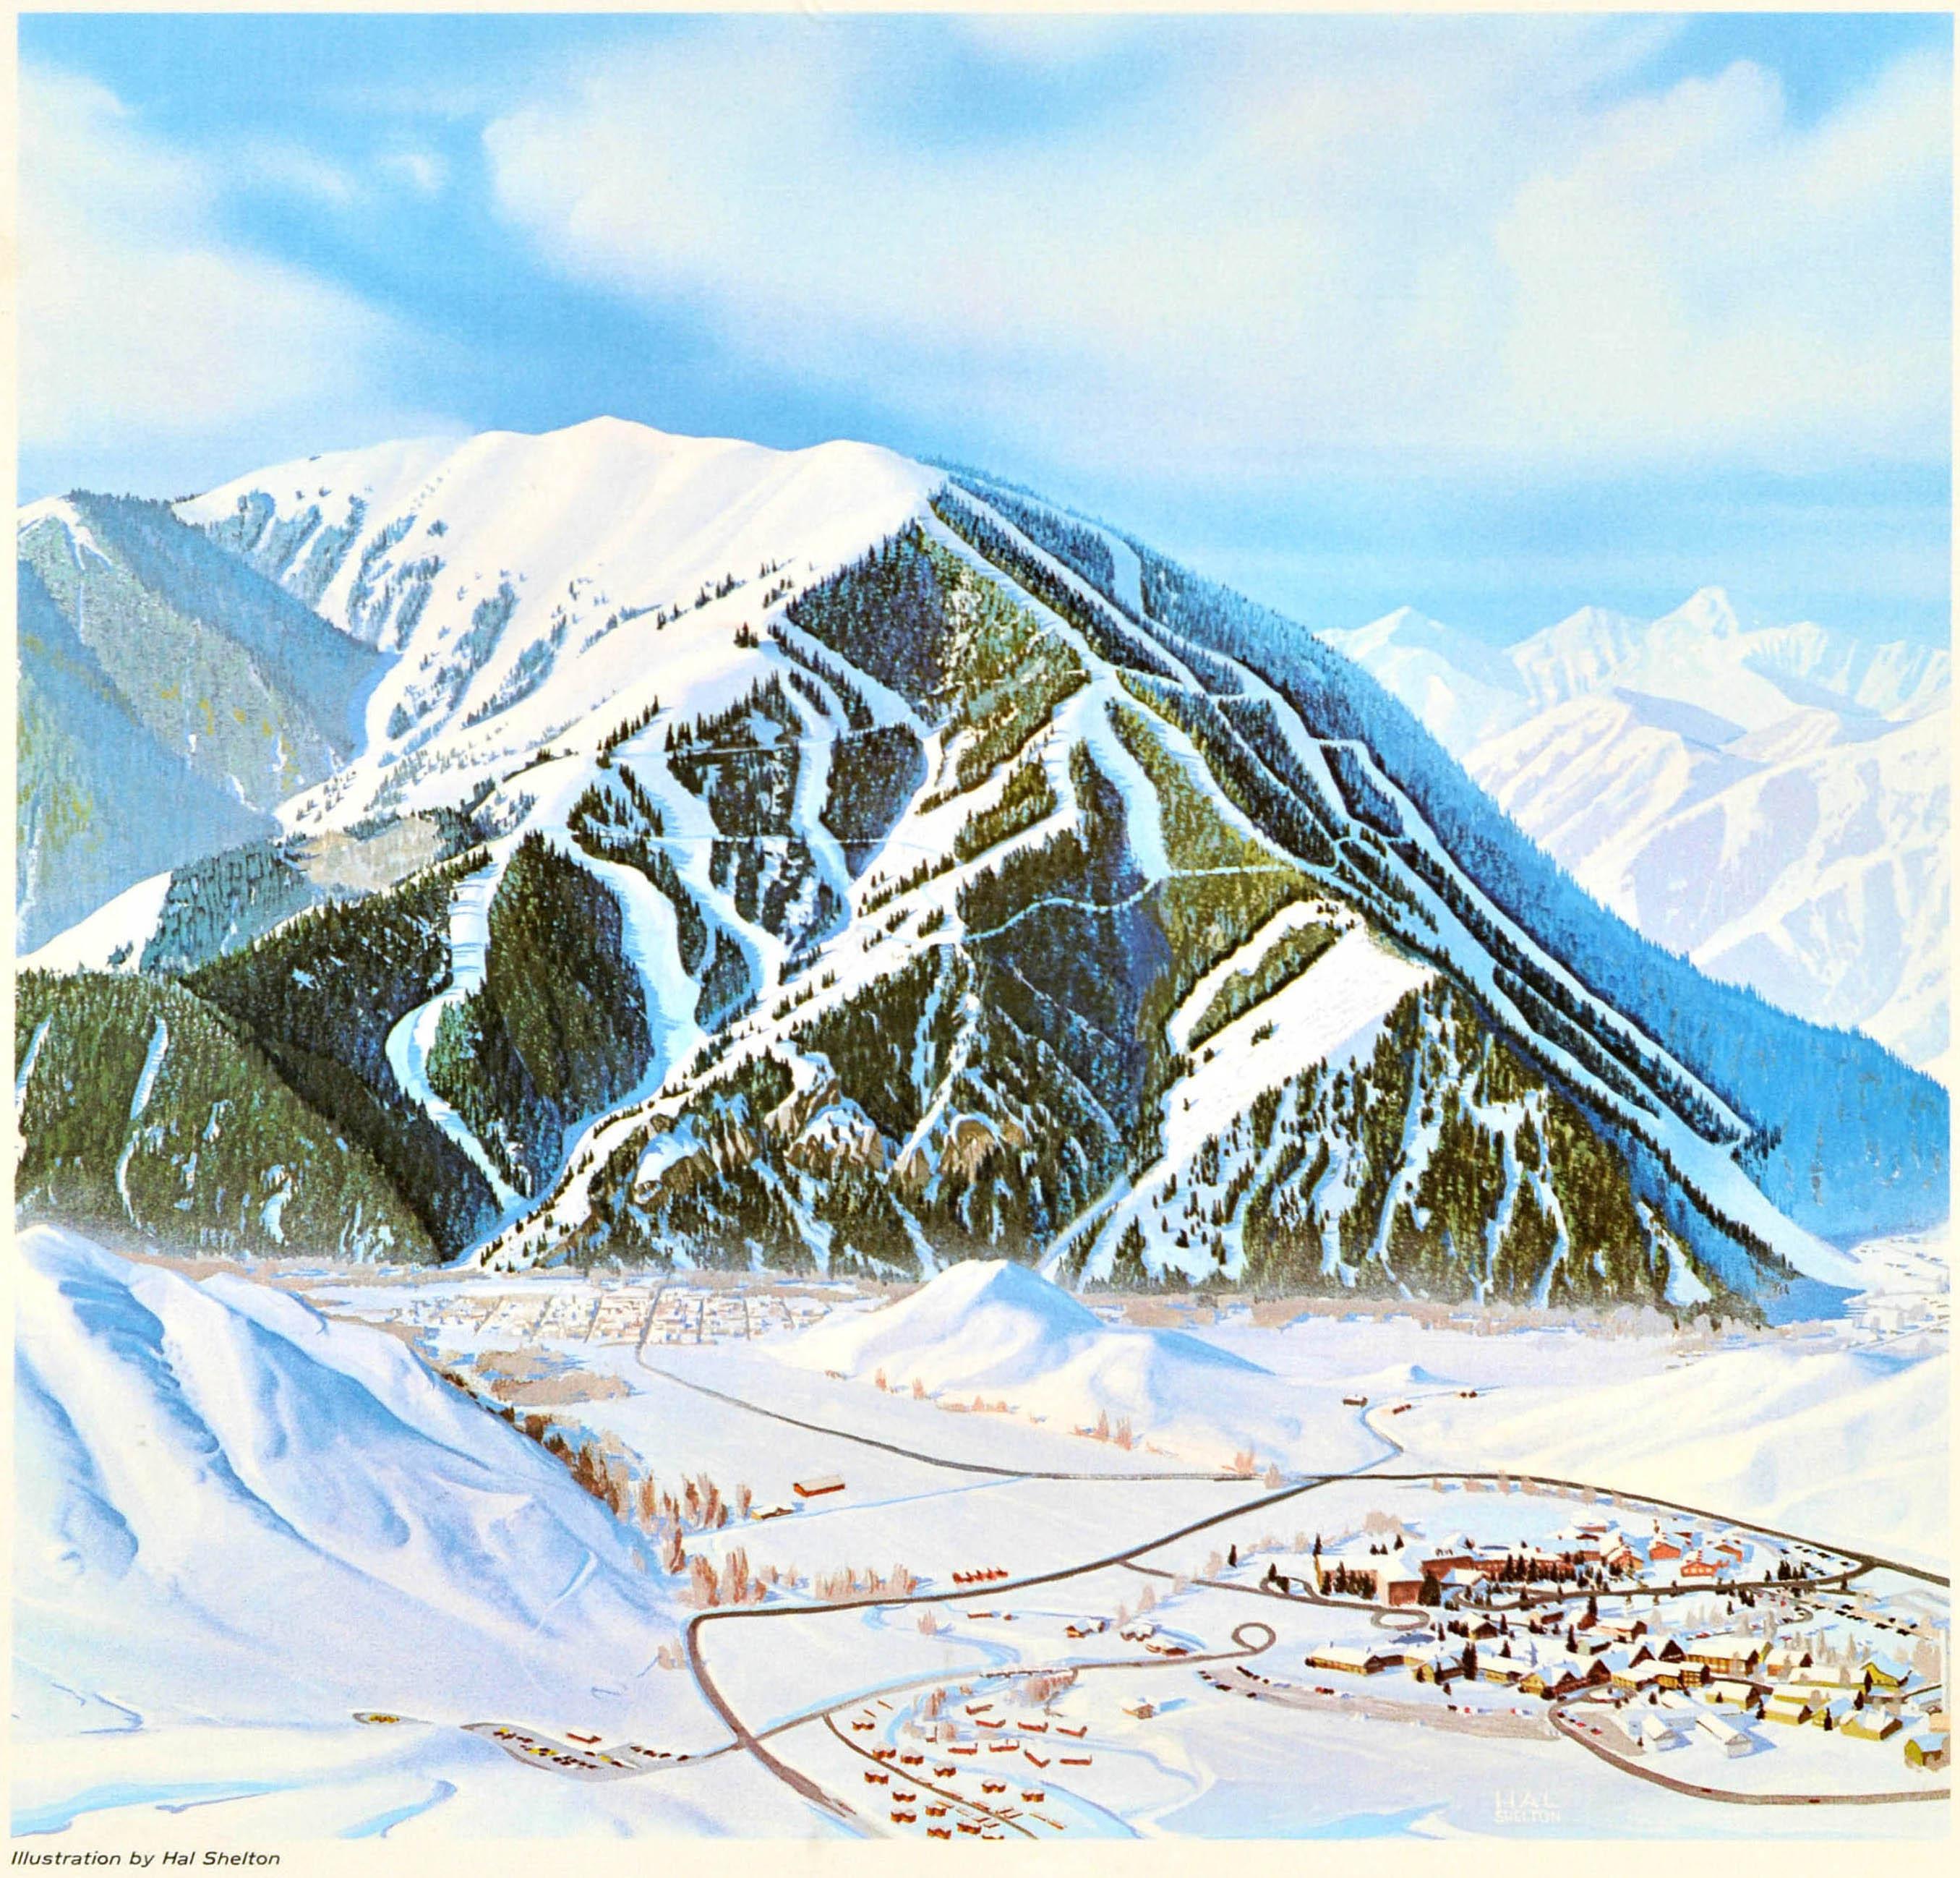 Original vintage winter travel poster for Sun Valley in Idaho the United States featuring a ski map view of the snow covered Bald Mountain with ski runs between the trees and the alpine ski resort city (founded in 1936) in the valley below, the text